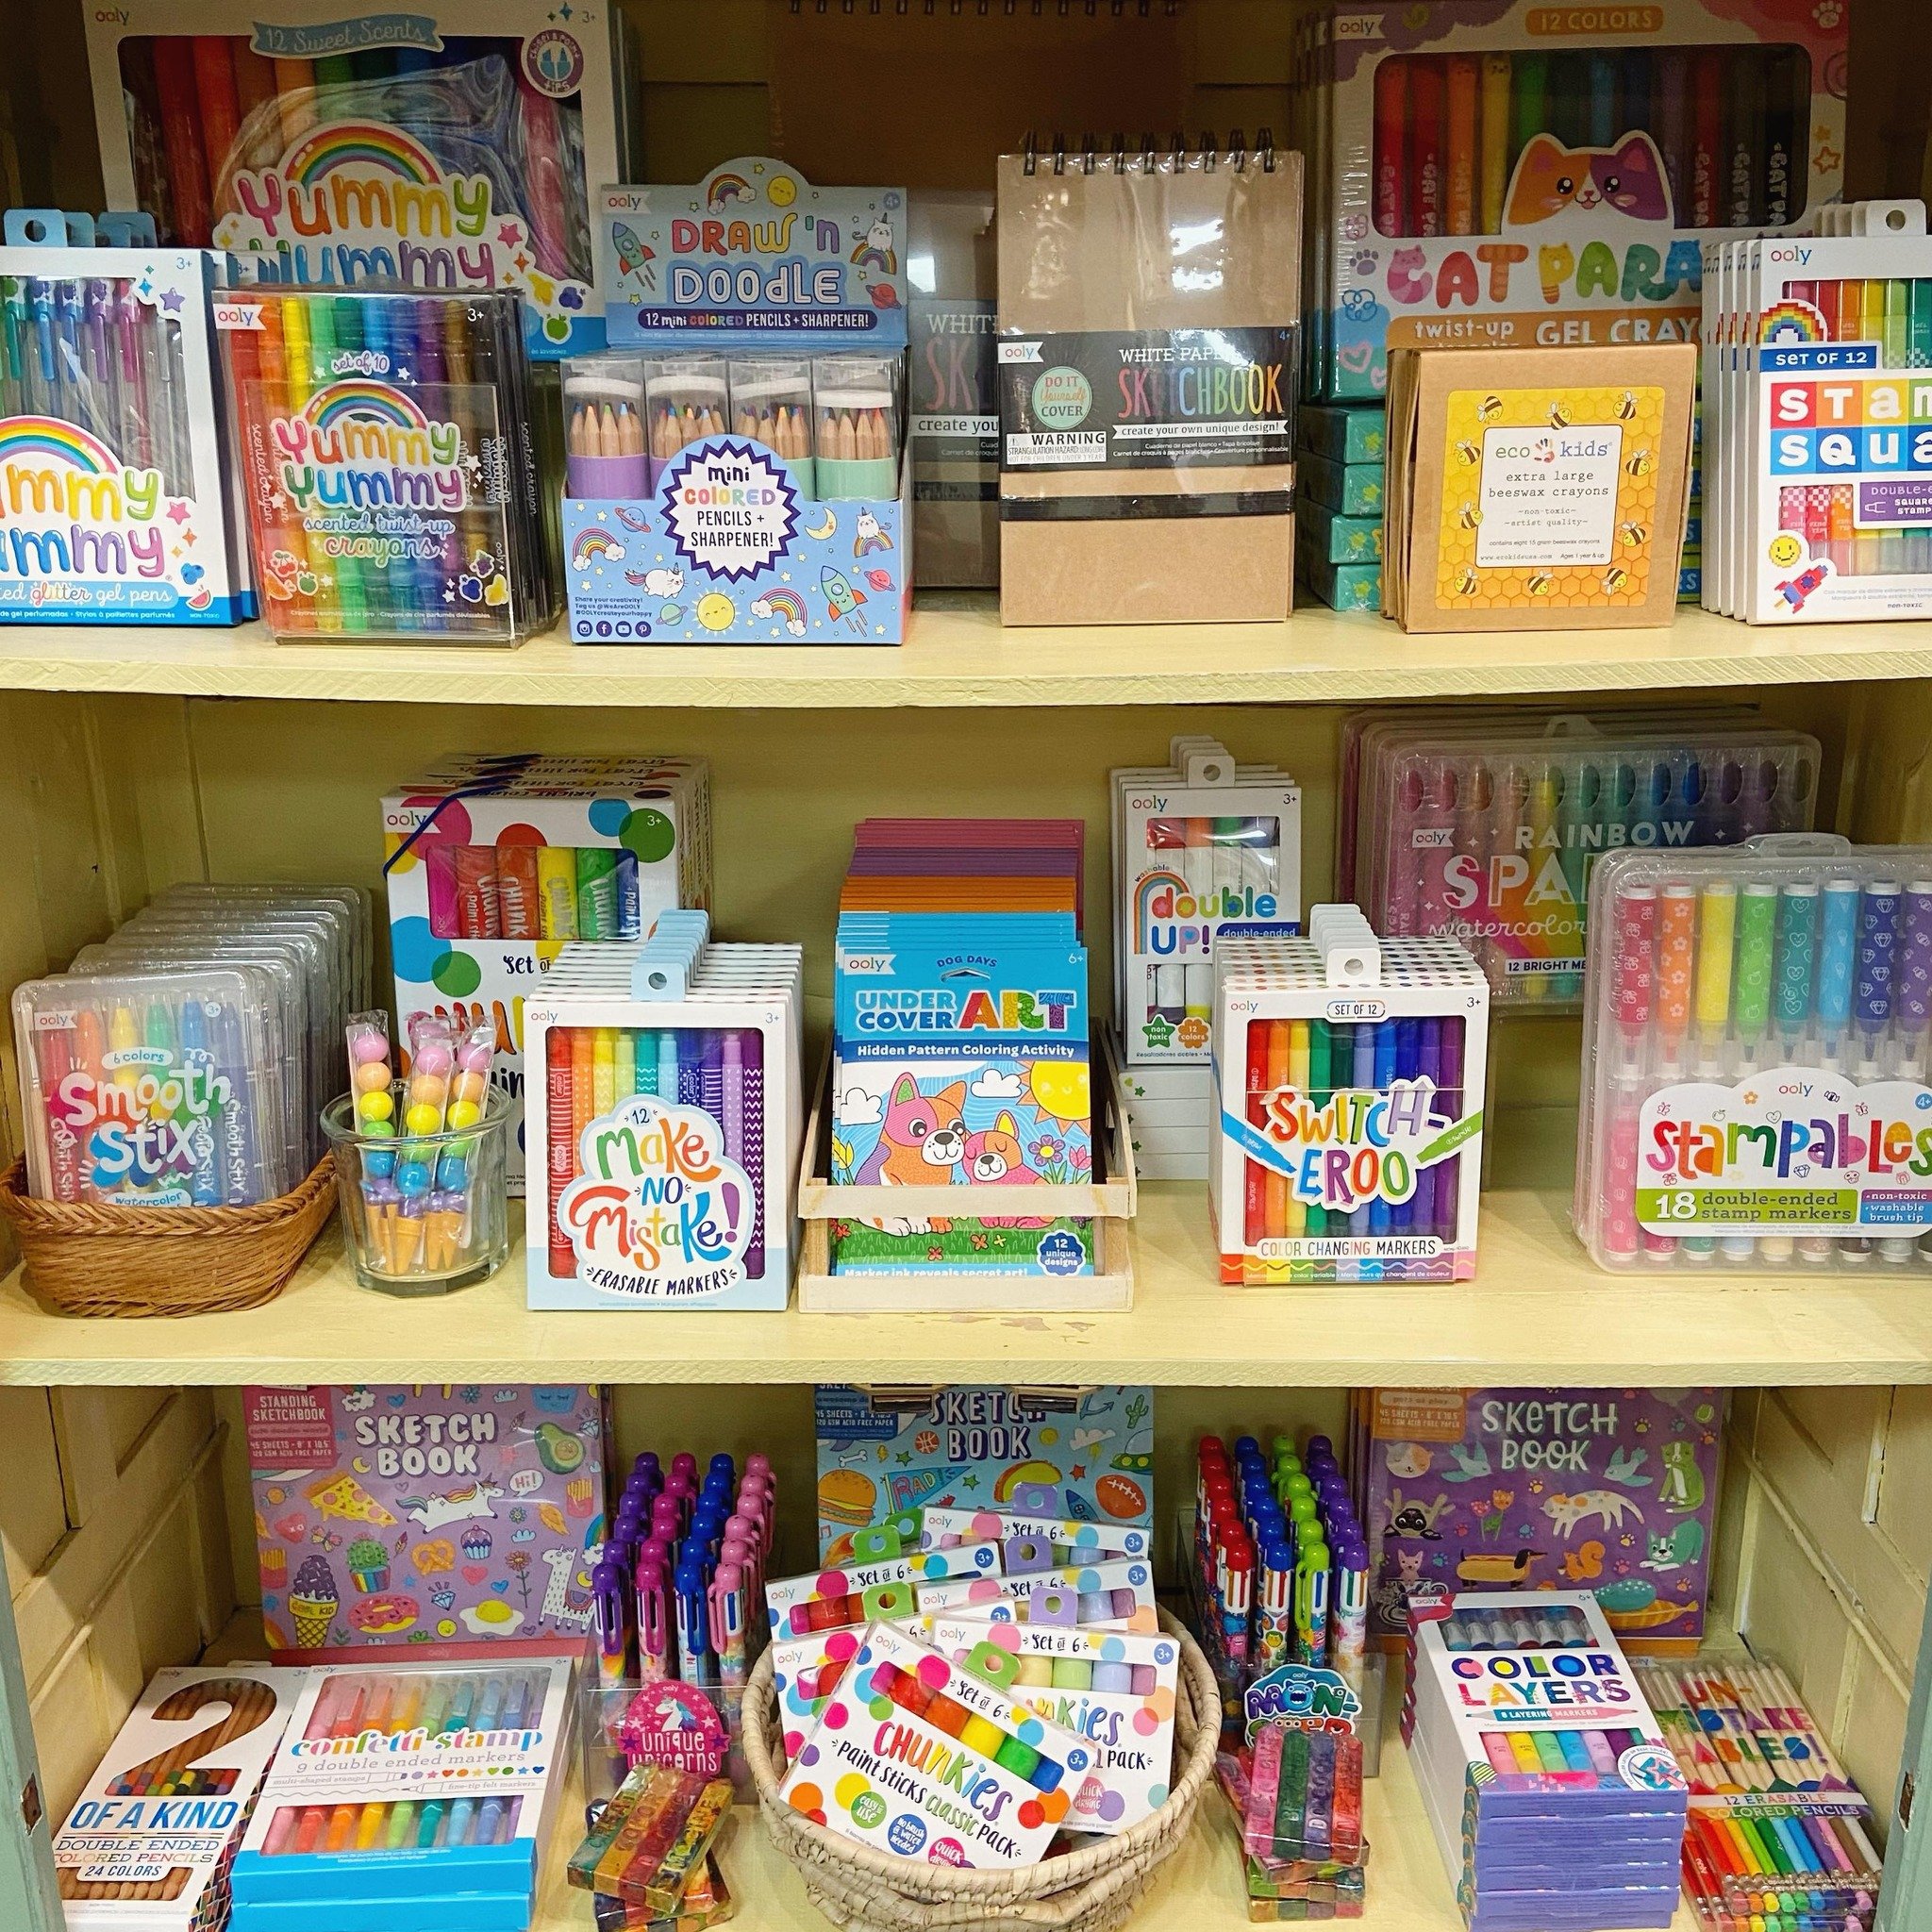 Our favorite tools for your budding artists! We just restocked some of our awesome @weareooly crayons, markers and more - perfect for birthday gifts and craft time! 🖍️